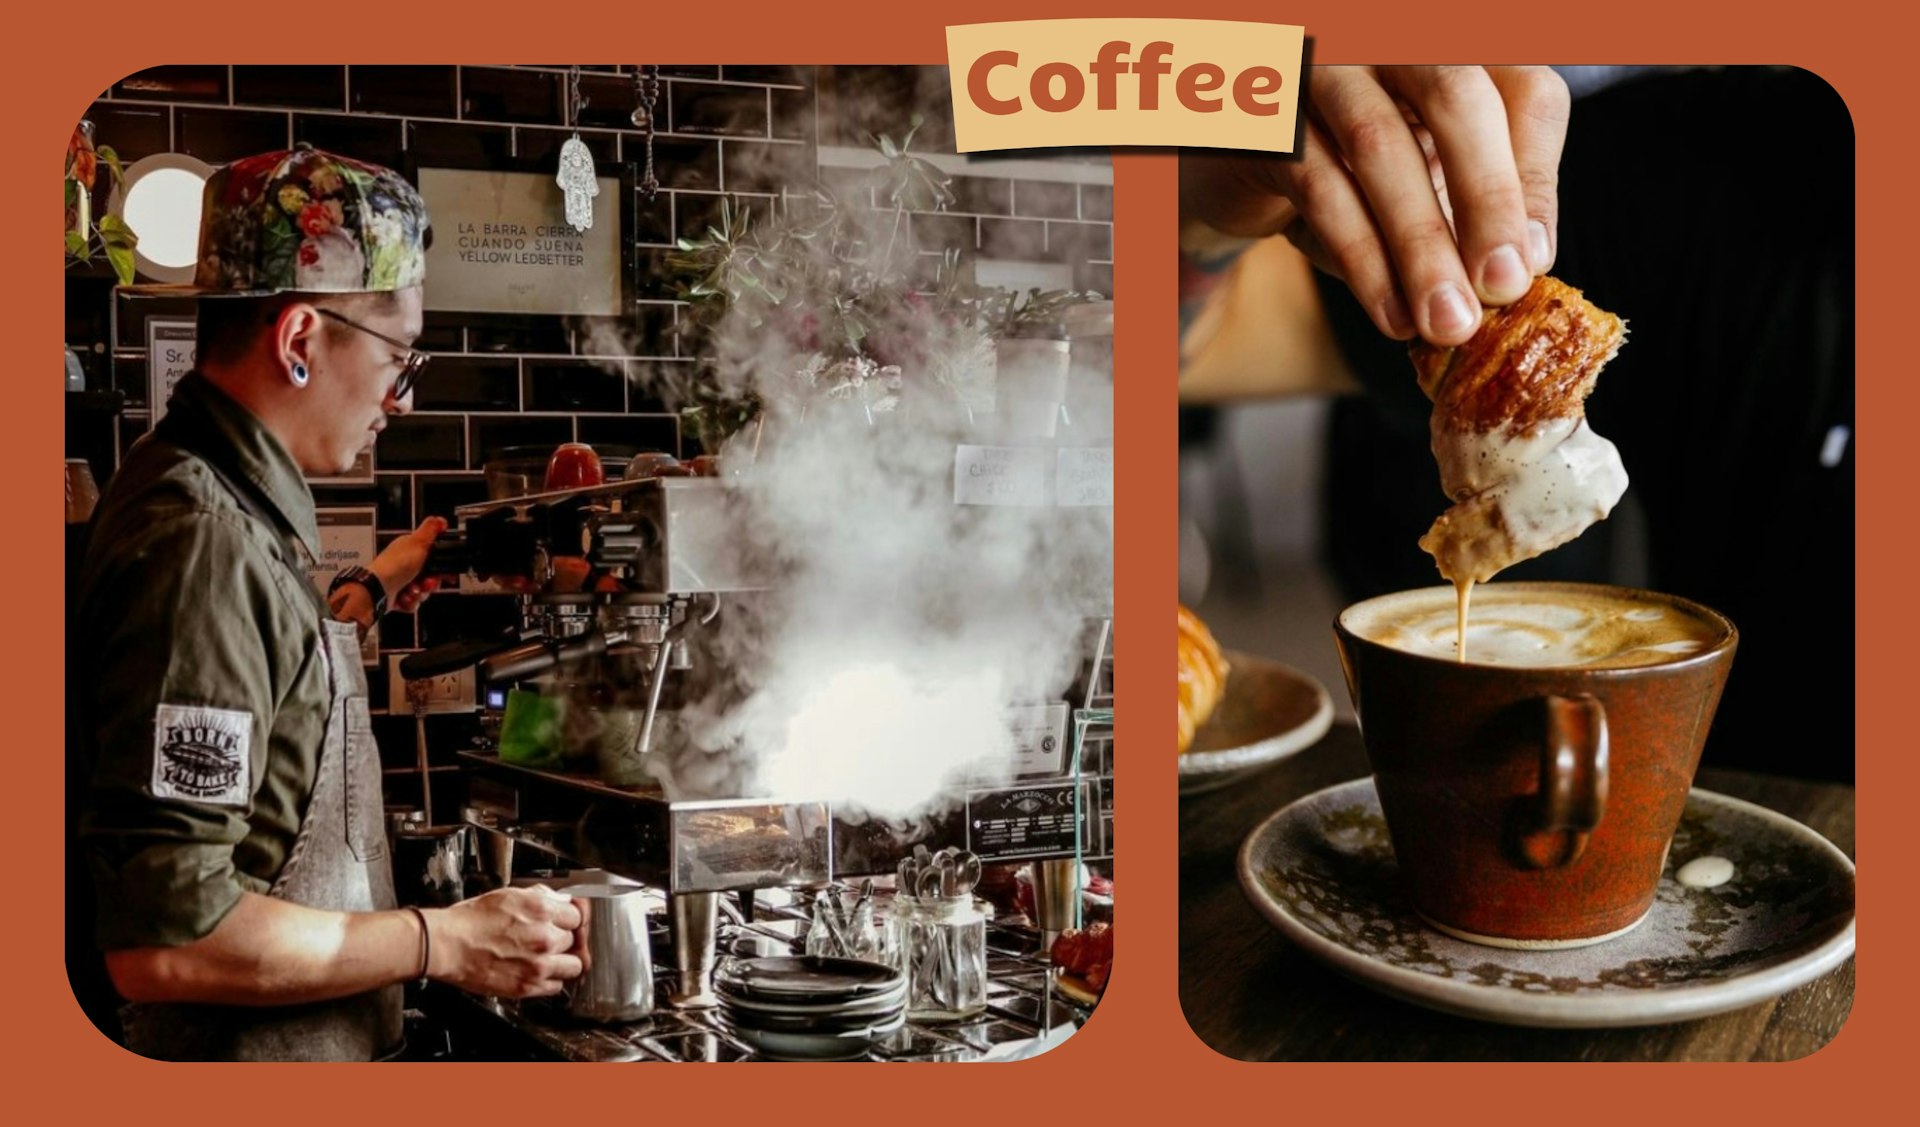 L: A barista prepares coffee in a dimly-lit cafe. R: A person dips a croissant into a creamty cup of coffee